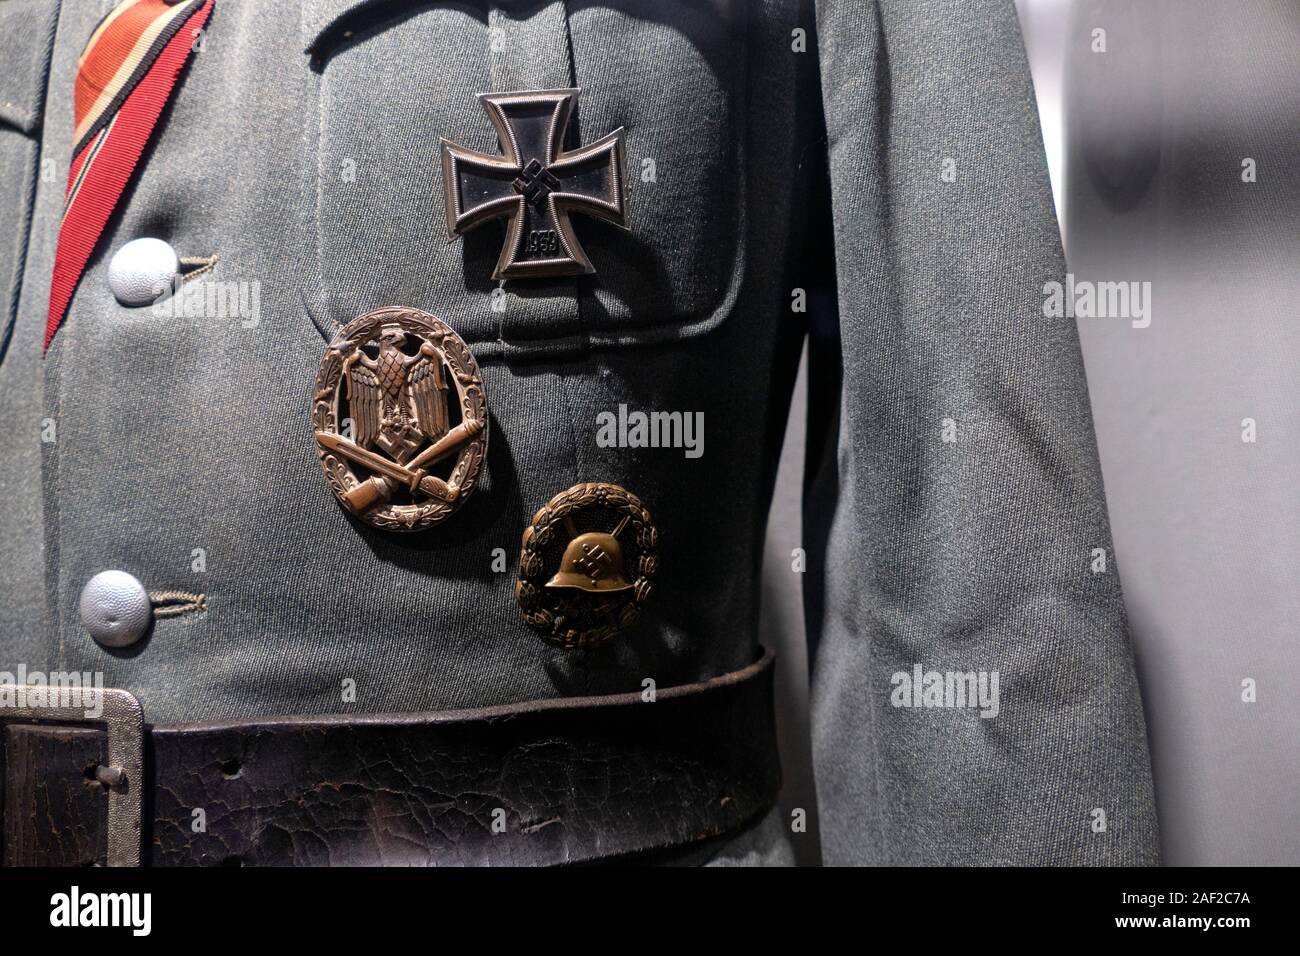 The remains of a Nazi uniform including the Iron Cross medal. Stalag Luft III - Stammlager Luft III near the Polish town of Sagan in Lower Silesia. Th Stock Photo